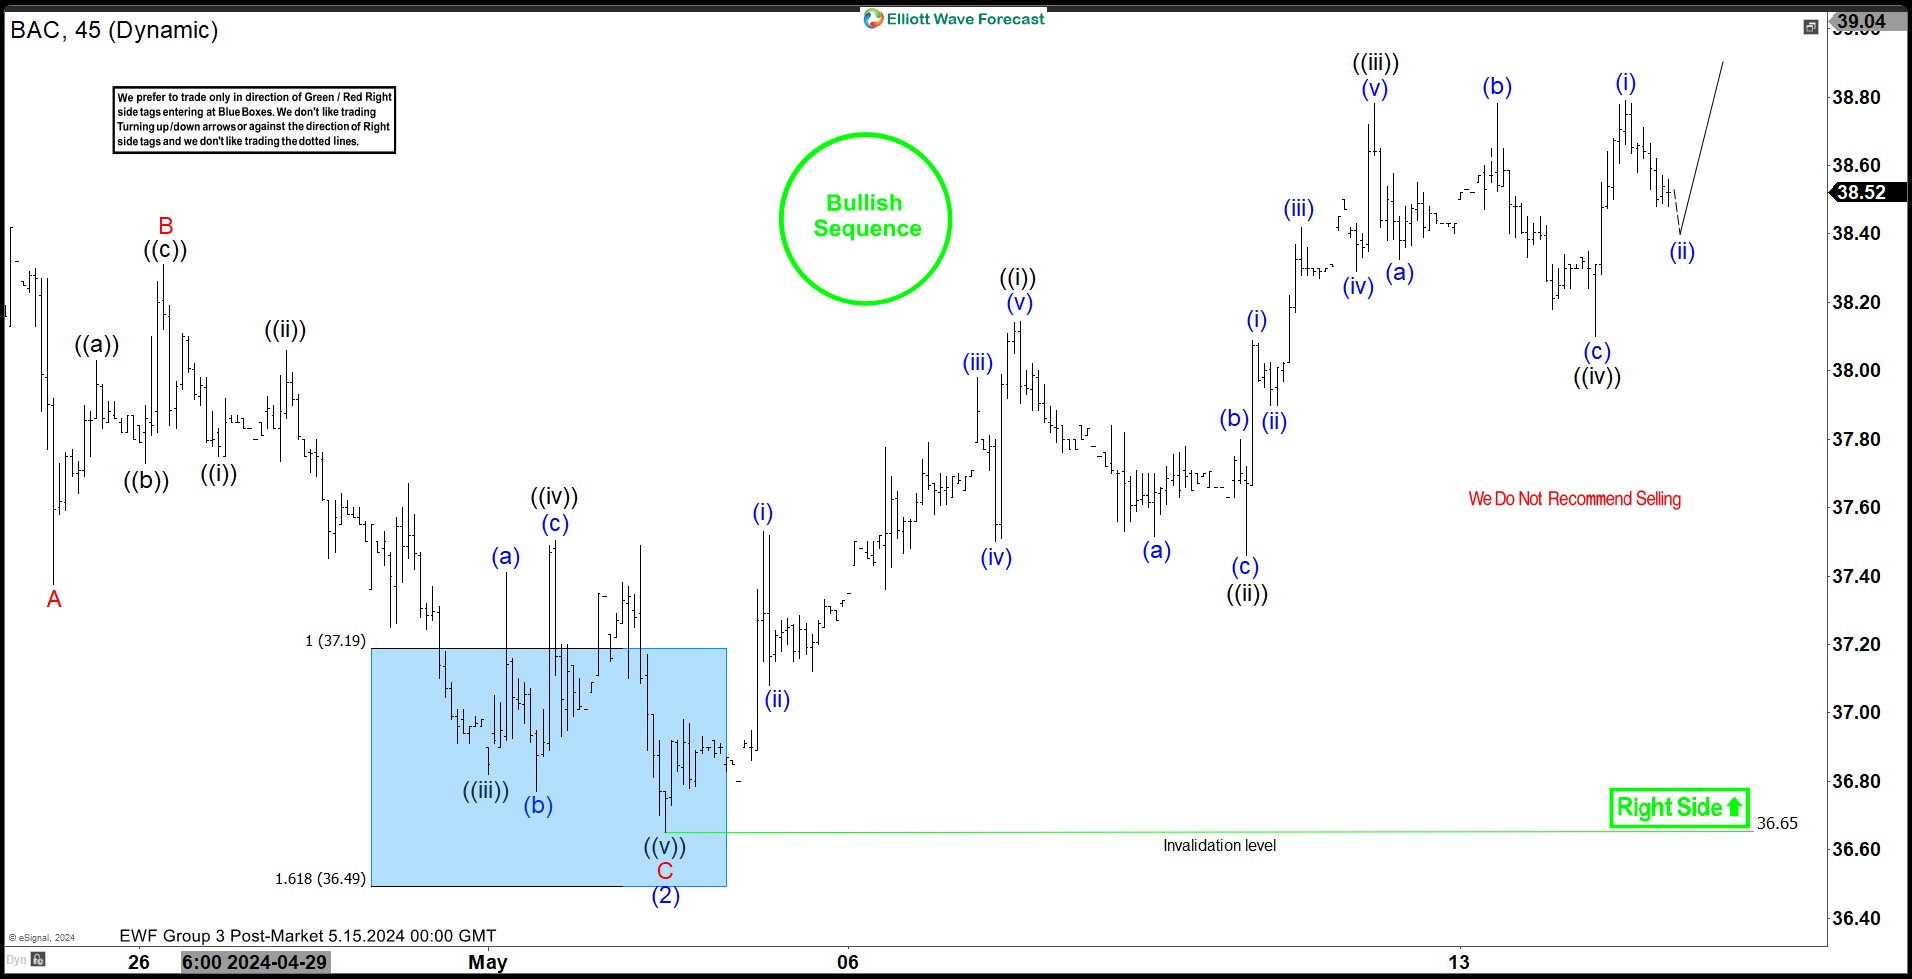 Elliott Wave Expects Bank of America (BAC) to Continue Higher